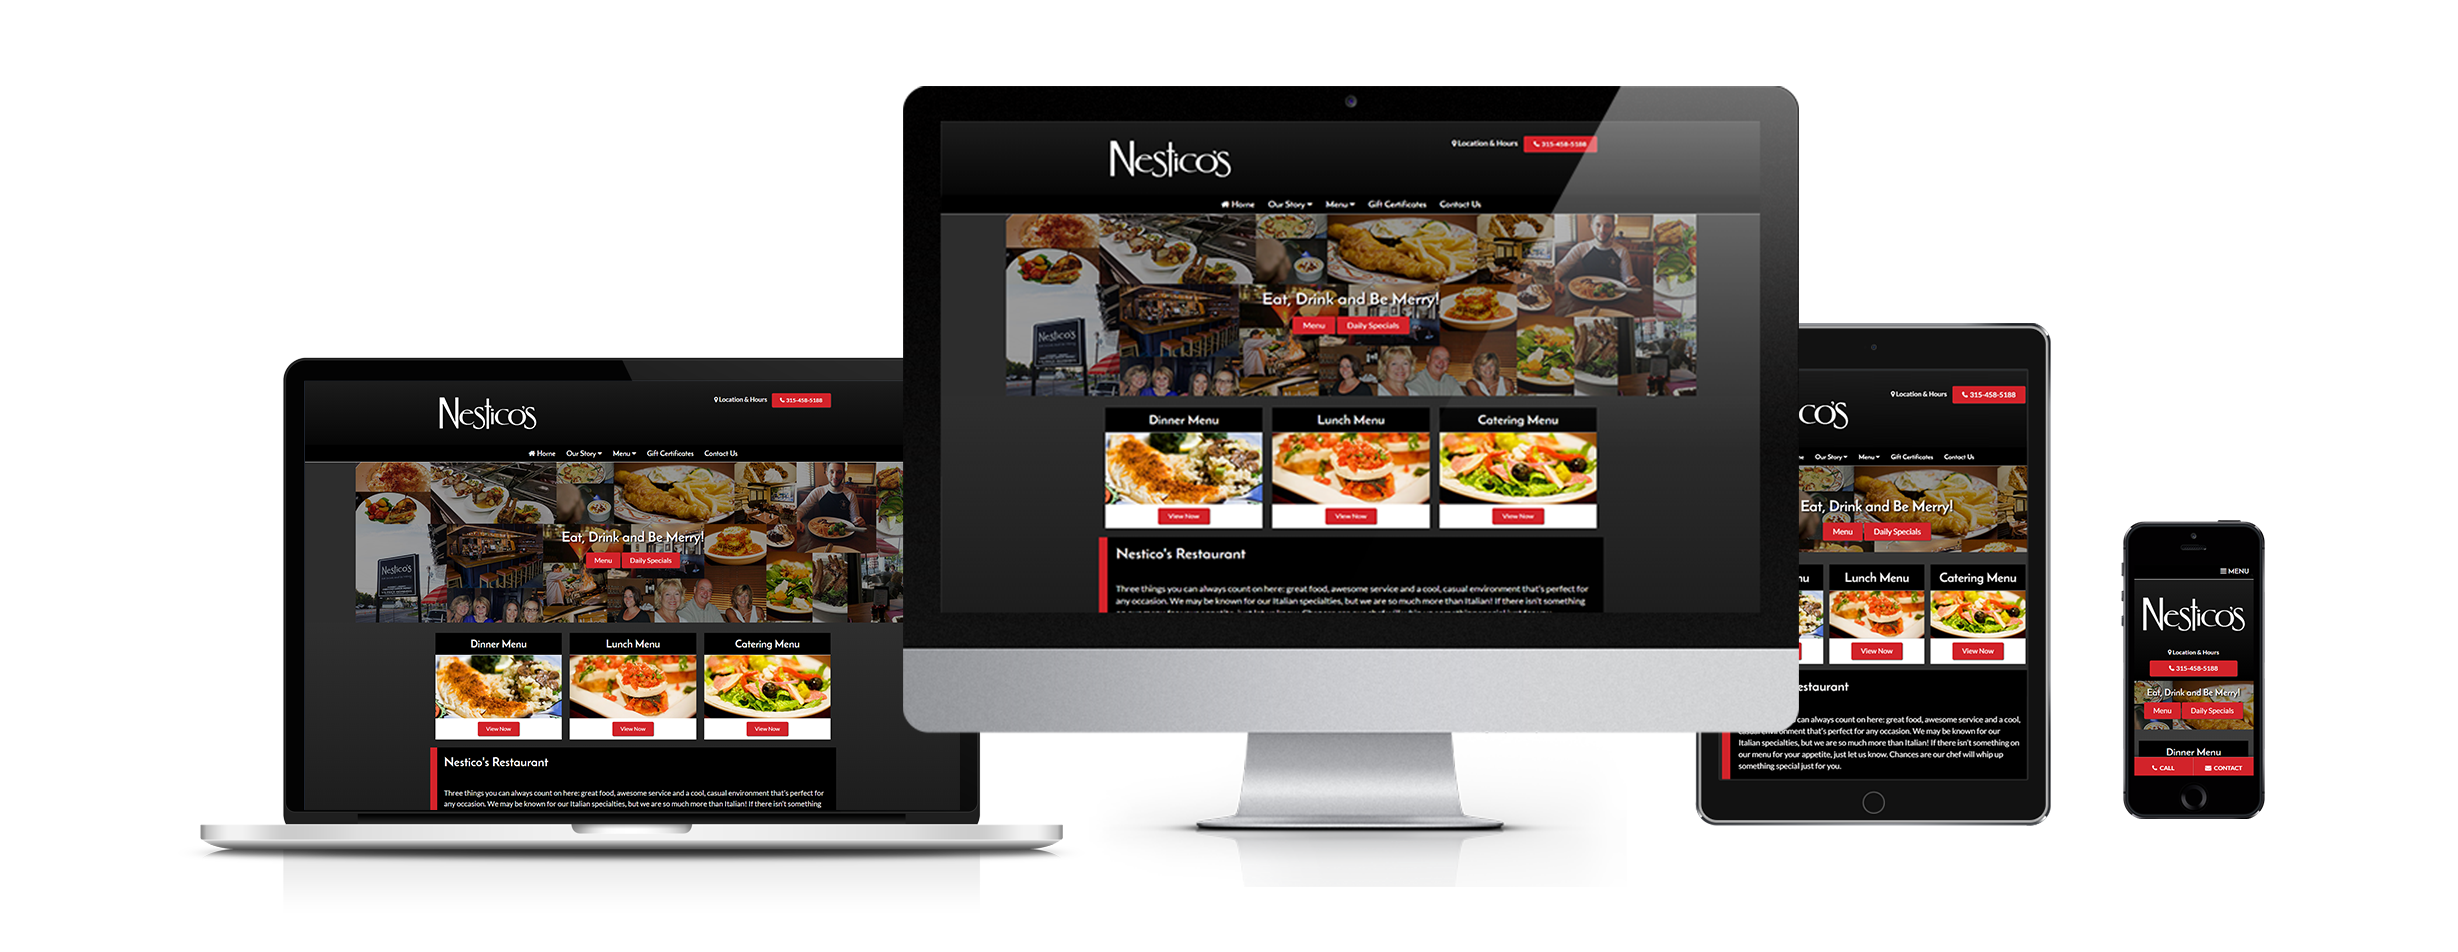 restaurant online ordering system and restaurant website design nesticos restaurant example by acs web design and seo